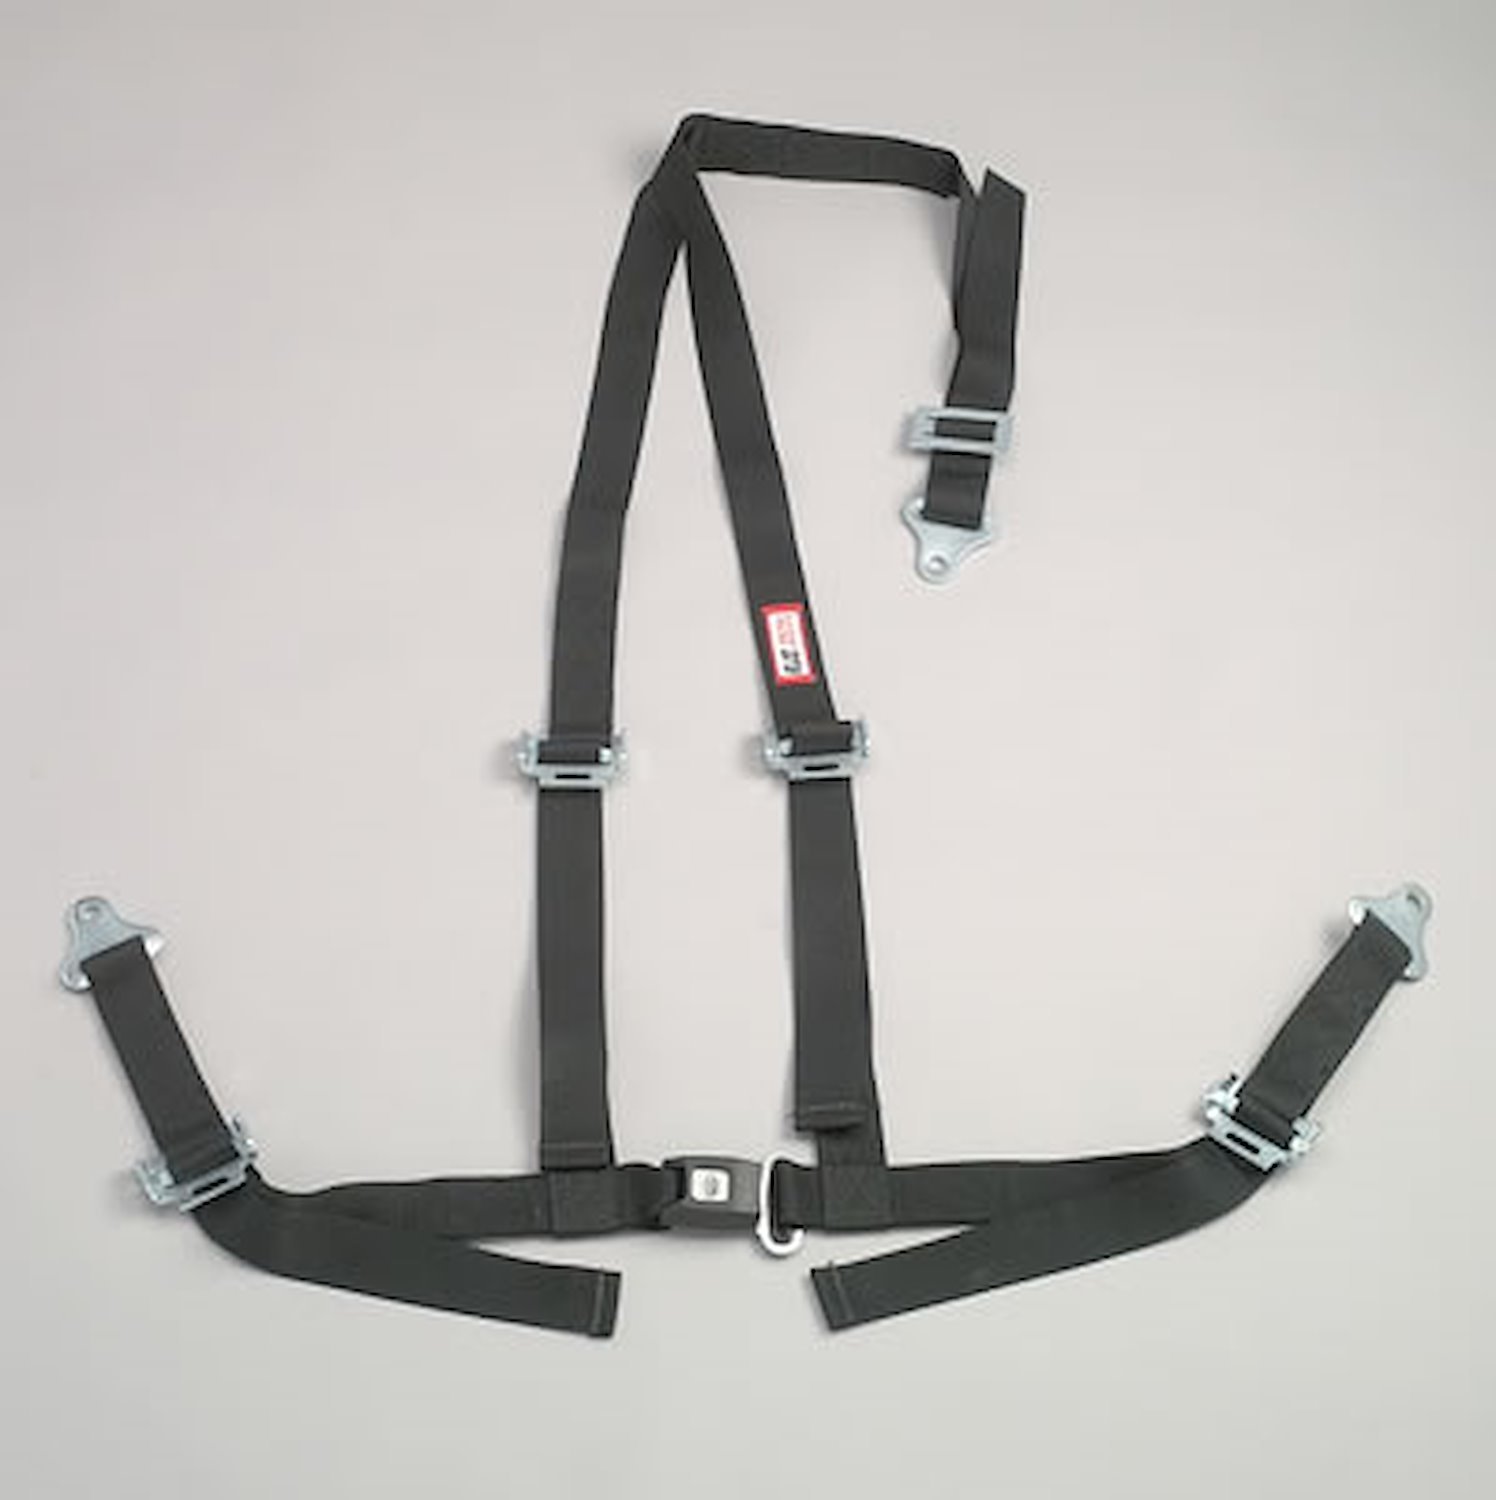 NON-SFI B&T HARNESS 2 PULL UP Lap Belt SNAP 2 S. H. Y FLOOR Mount WRAP/BOLT w/STERNUM STRAP OD GREEN